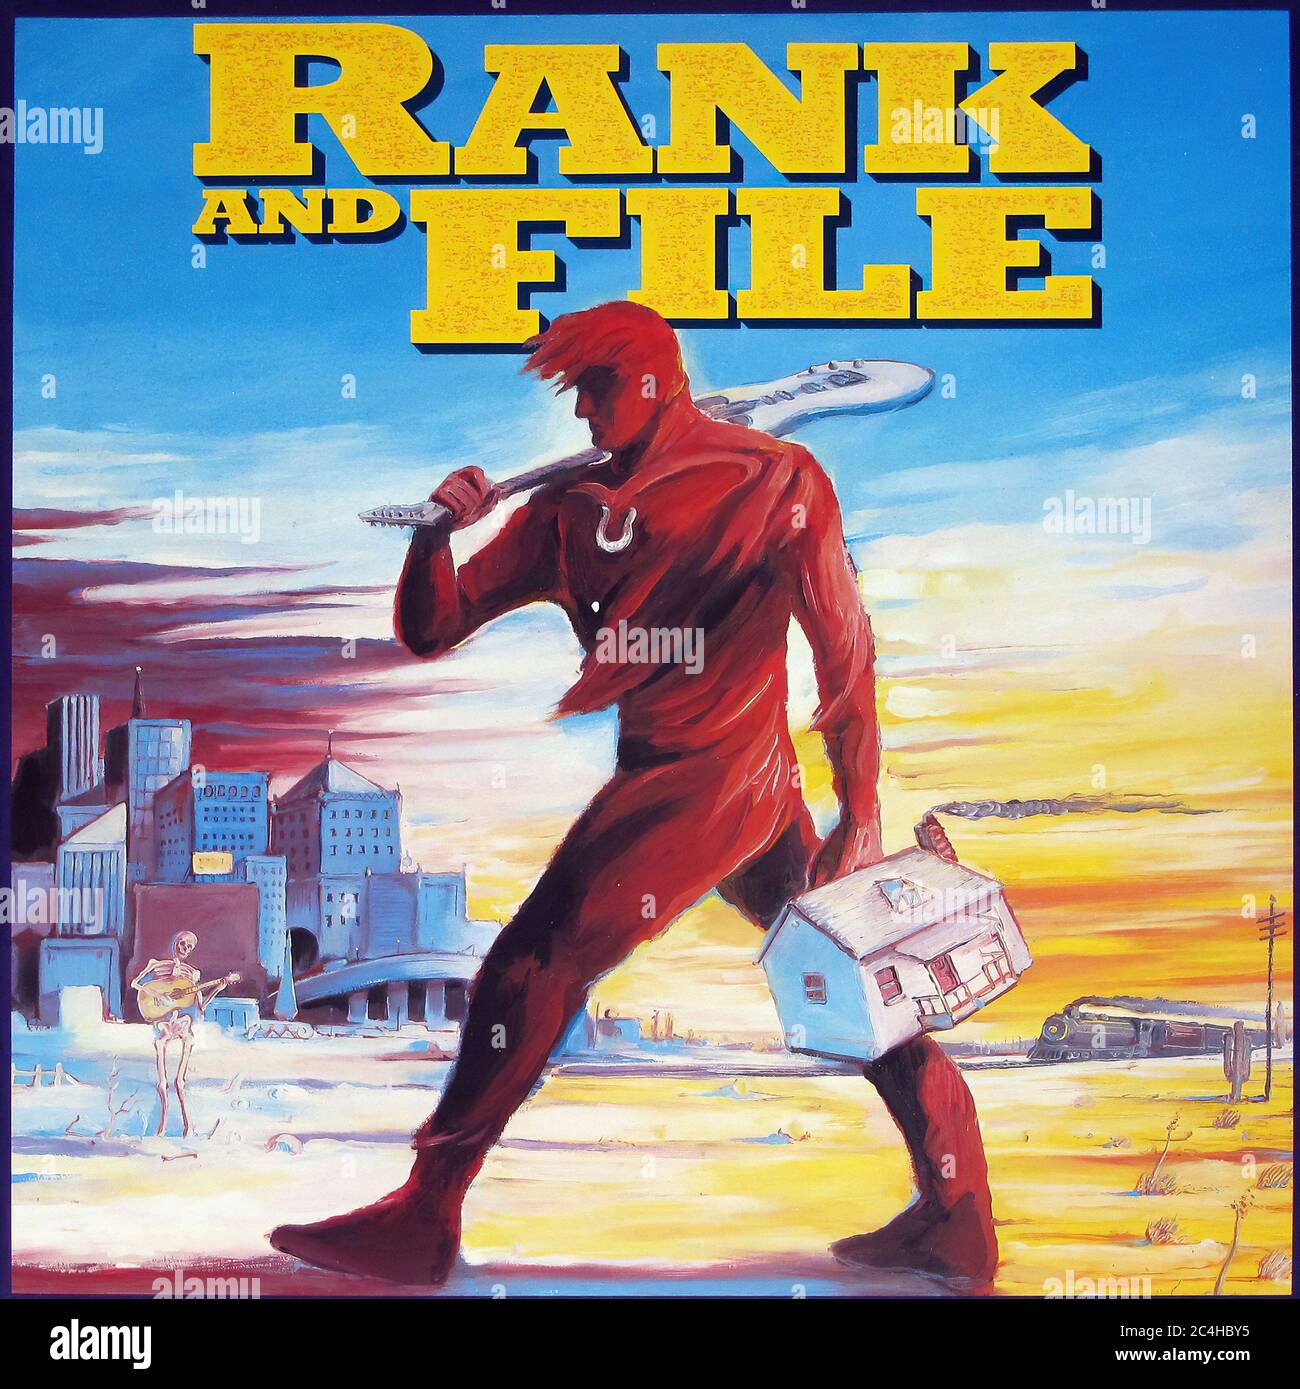 Rank and File St Self Titled 12'' Lp Vinyl - Vintage Record Cover Stock Photo